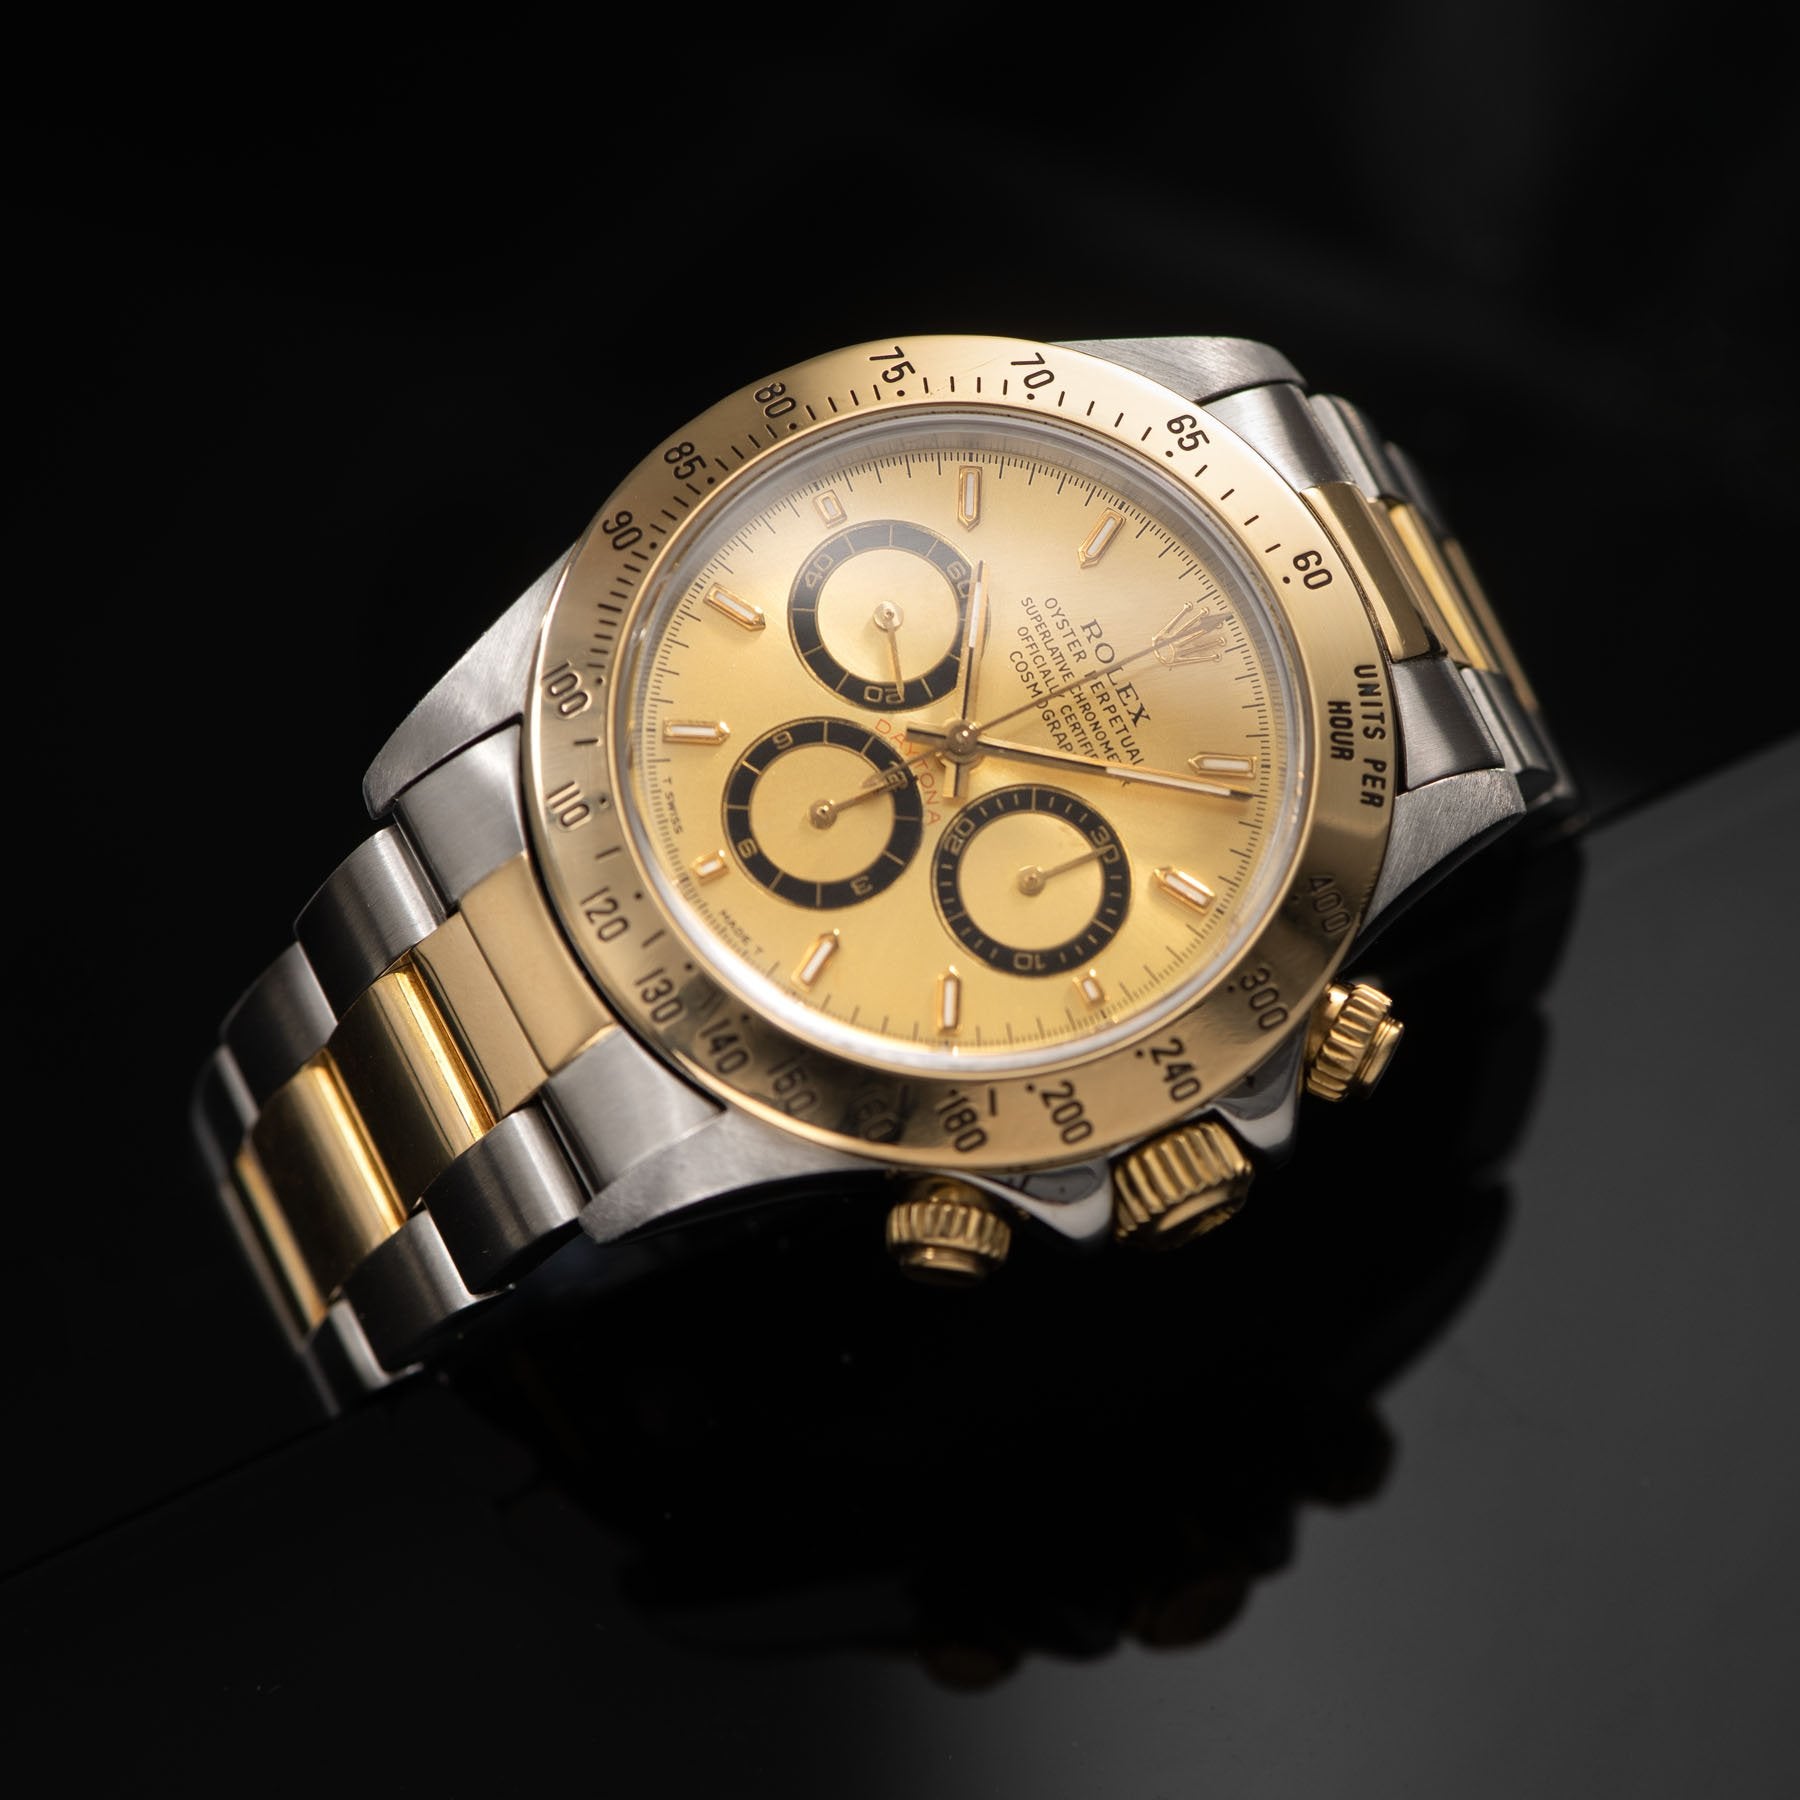 Rolex Daytona Steel and Gold 16523 Champagne Dial